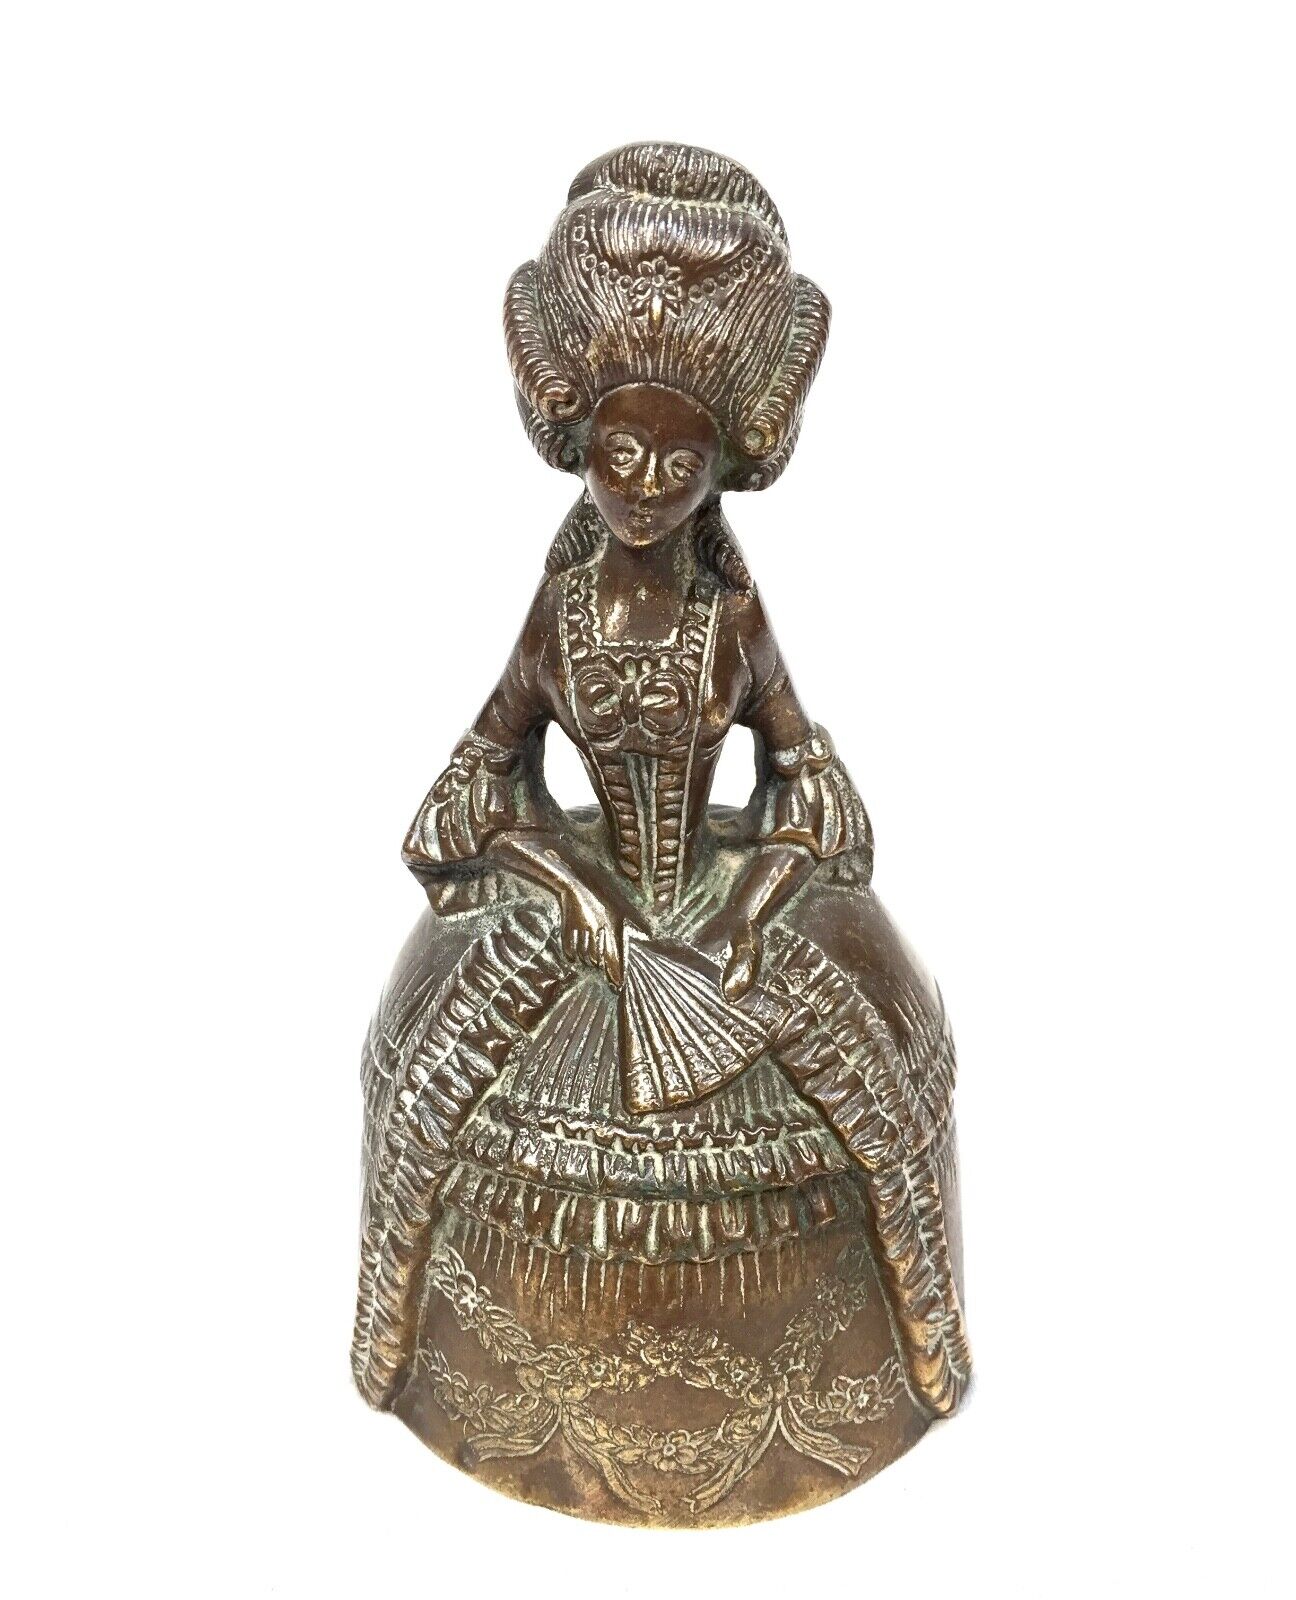 Antique Brass Bell in the Form of a Victorian Dressed Lady / Early 20th Century